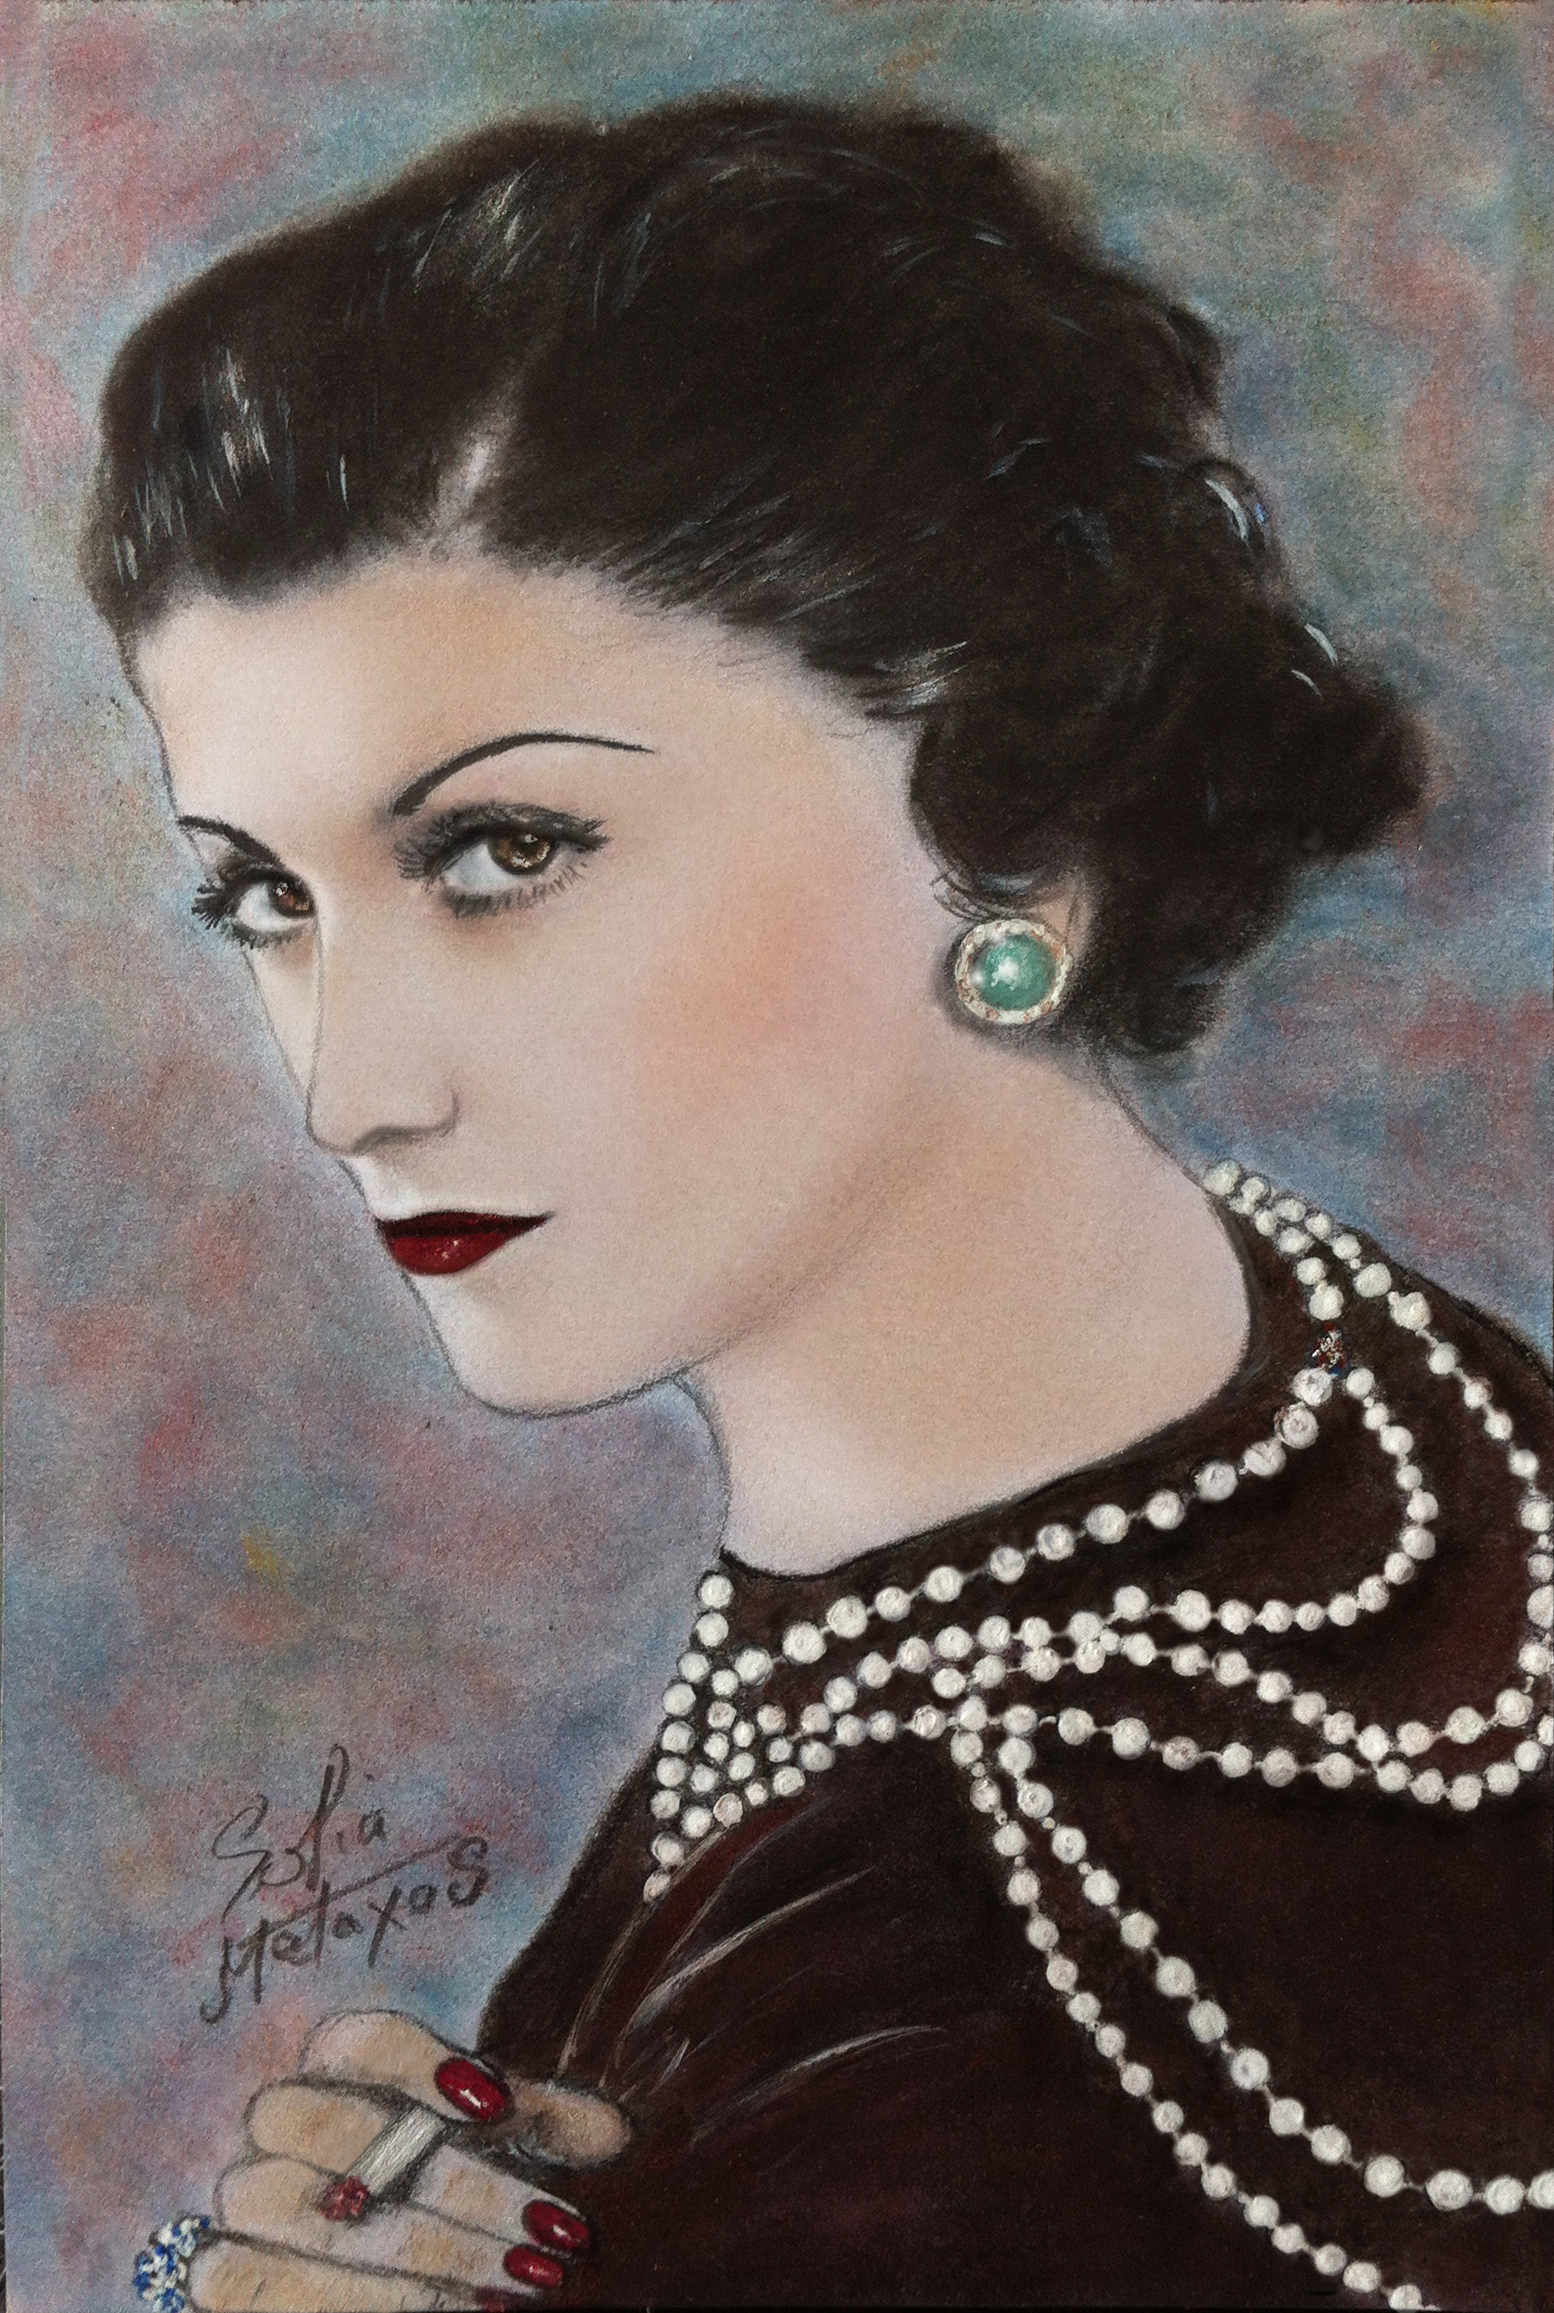 Coco Chanel makeup drawing by SofiaMetaxas on DeviantArt